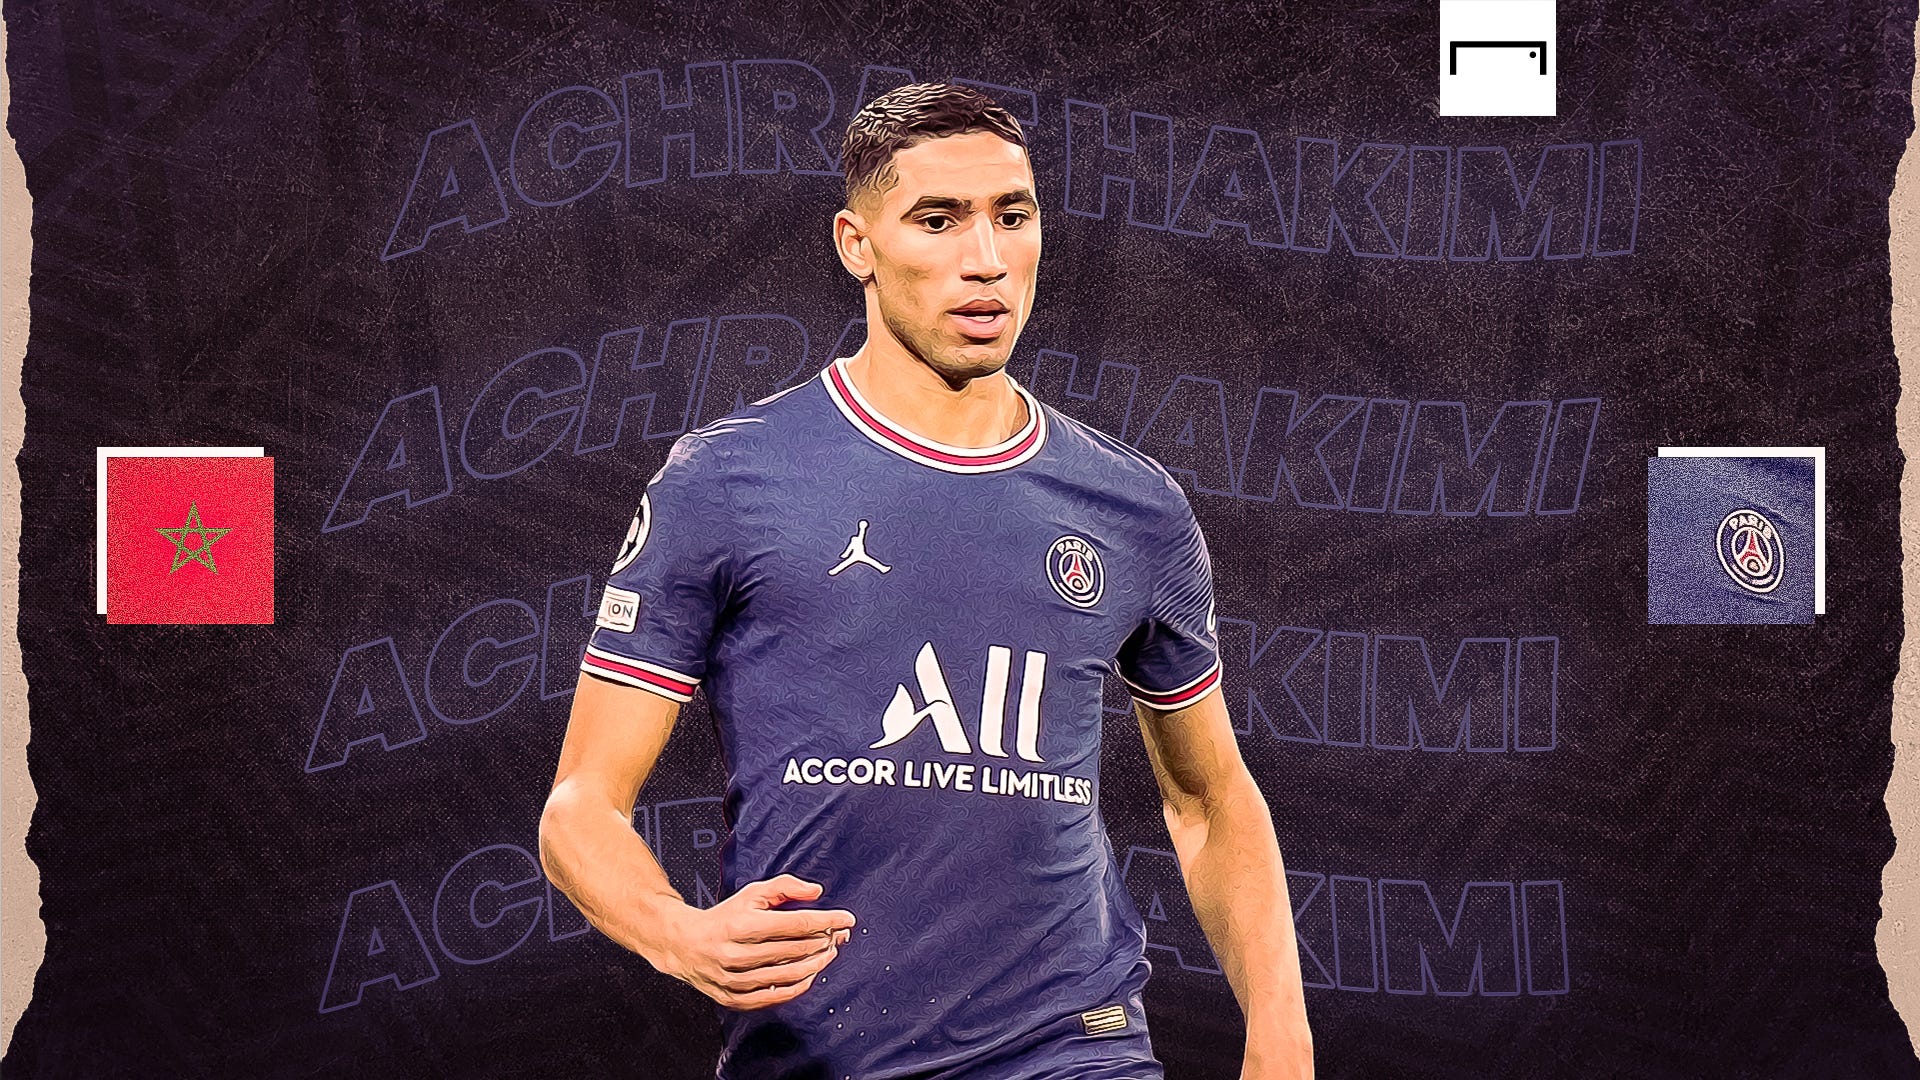 Achraf Hakimi, what does the future hold?